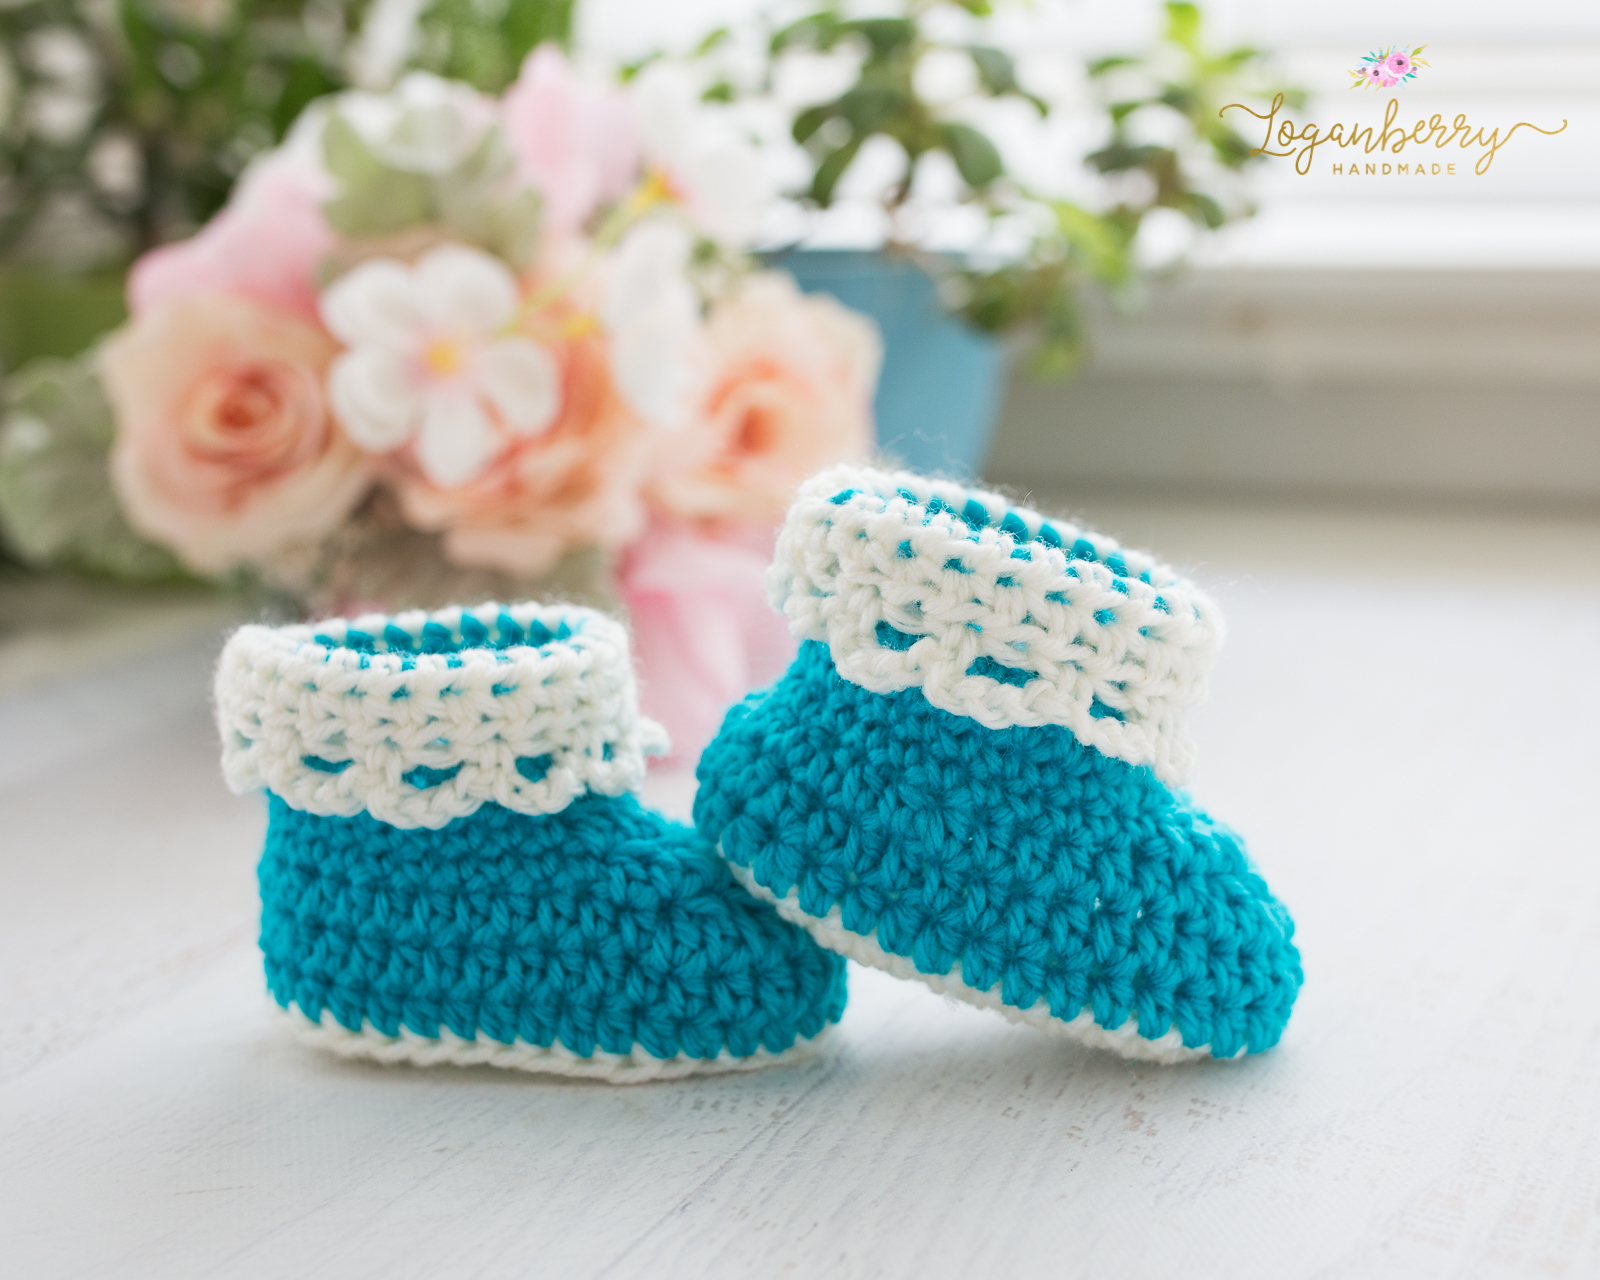 Crochet Pattern For Baby Booties Lace Trim Ba Booties Free Crochet Pattern Loganberry Handmade